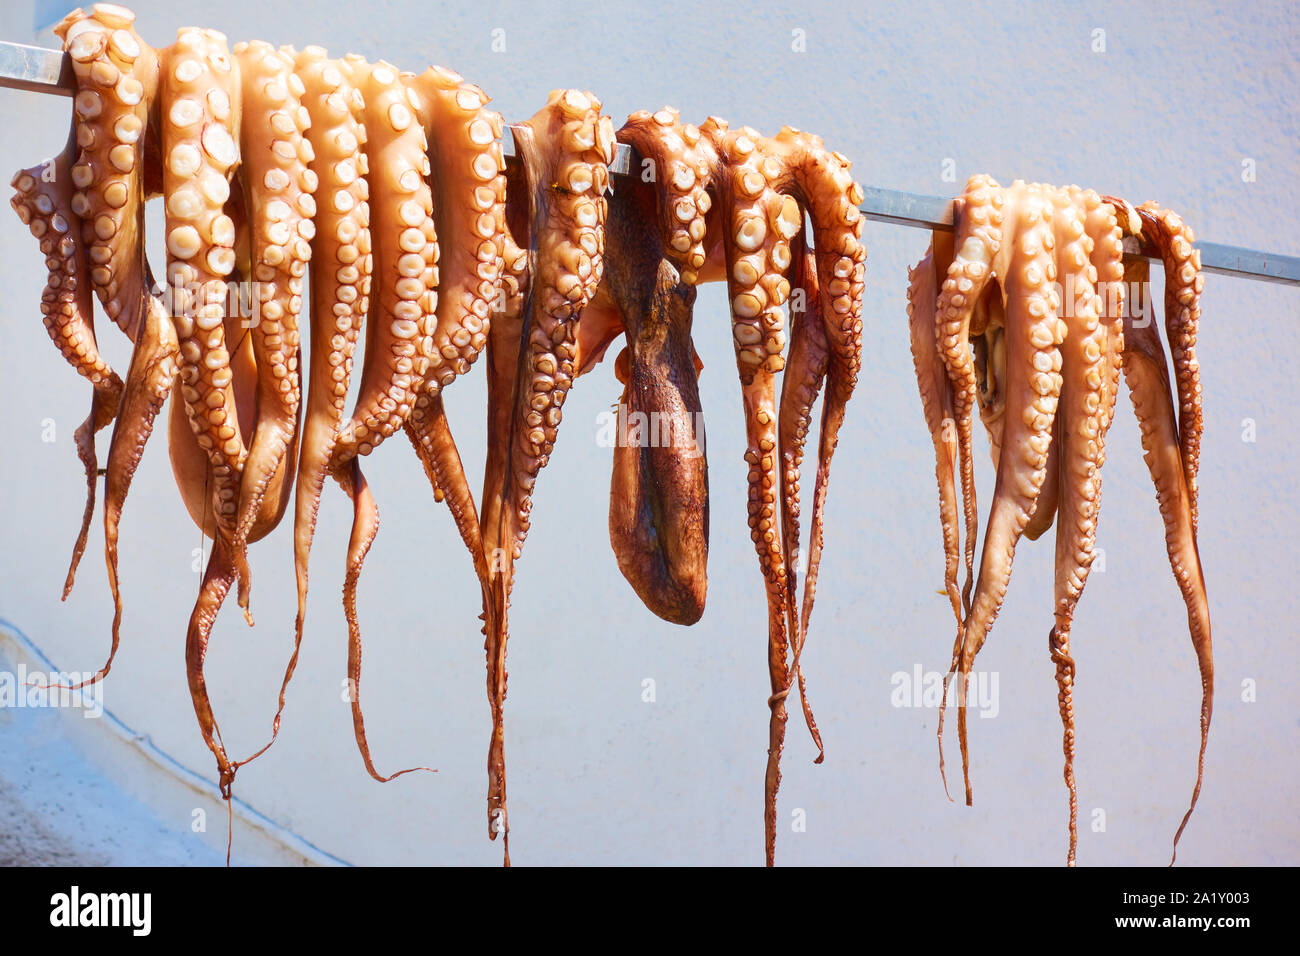 Drying the octopus in the sun at a greek tavern, Greece Stock Photo